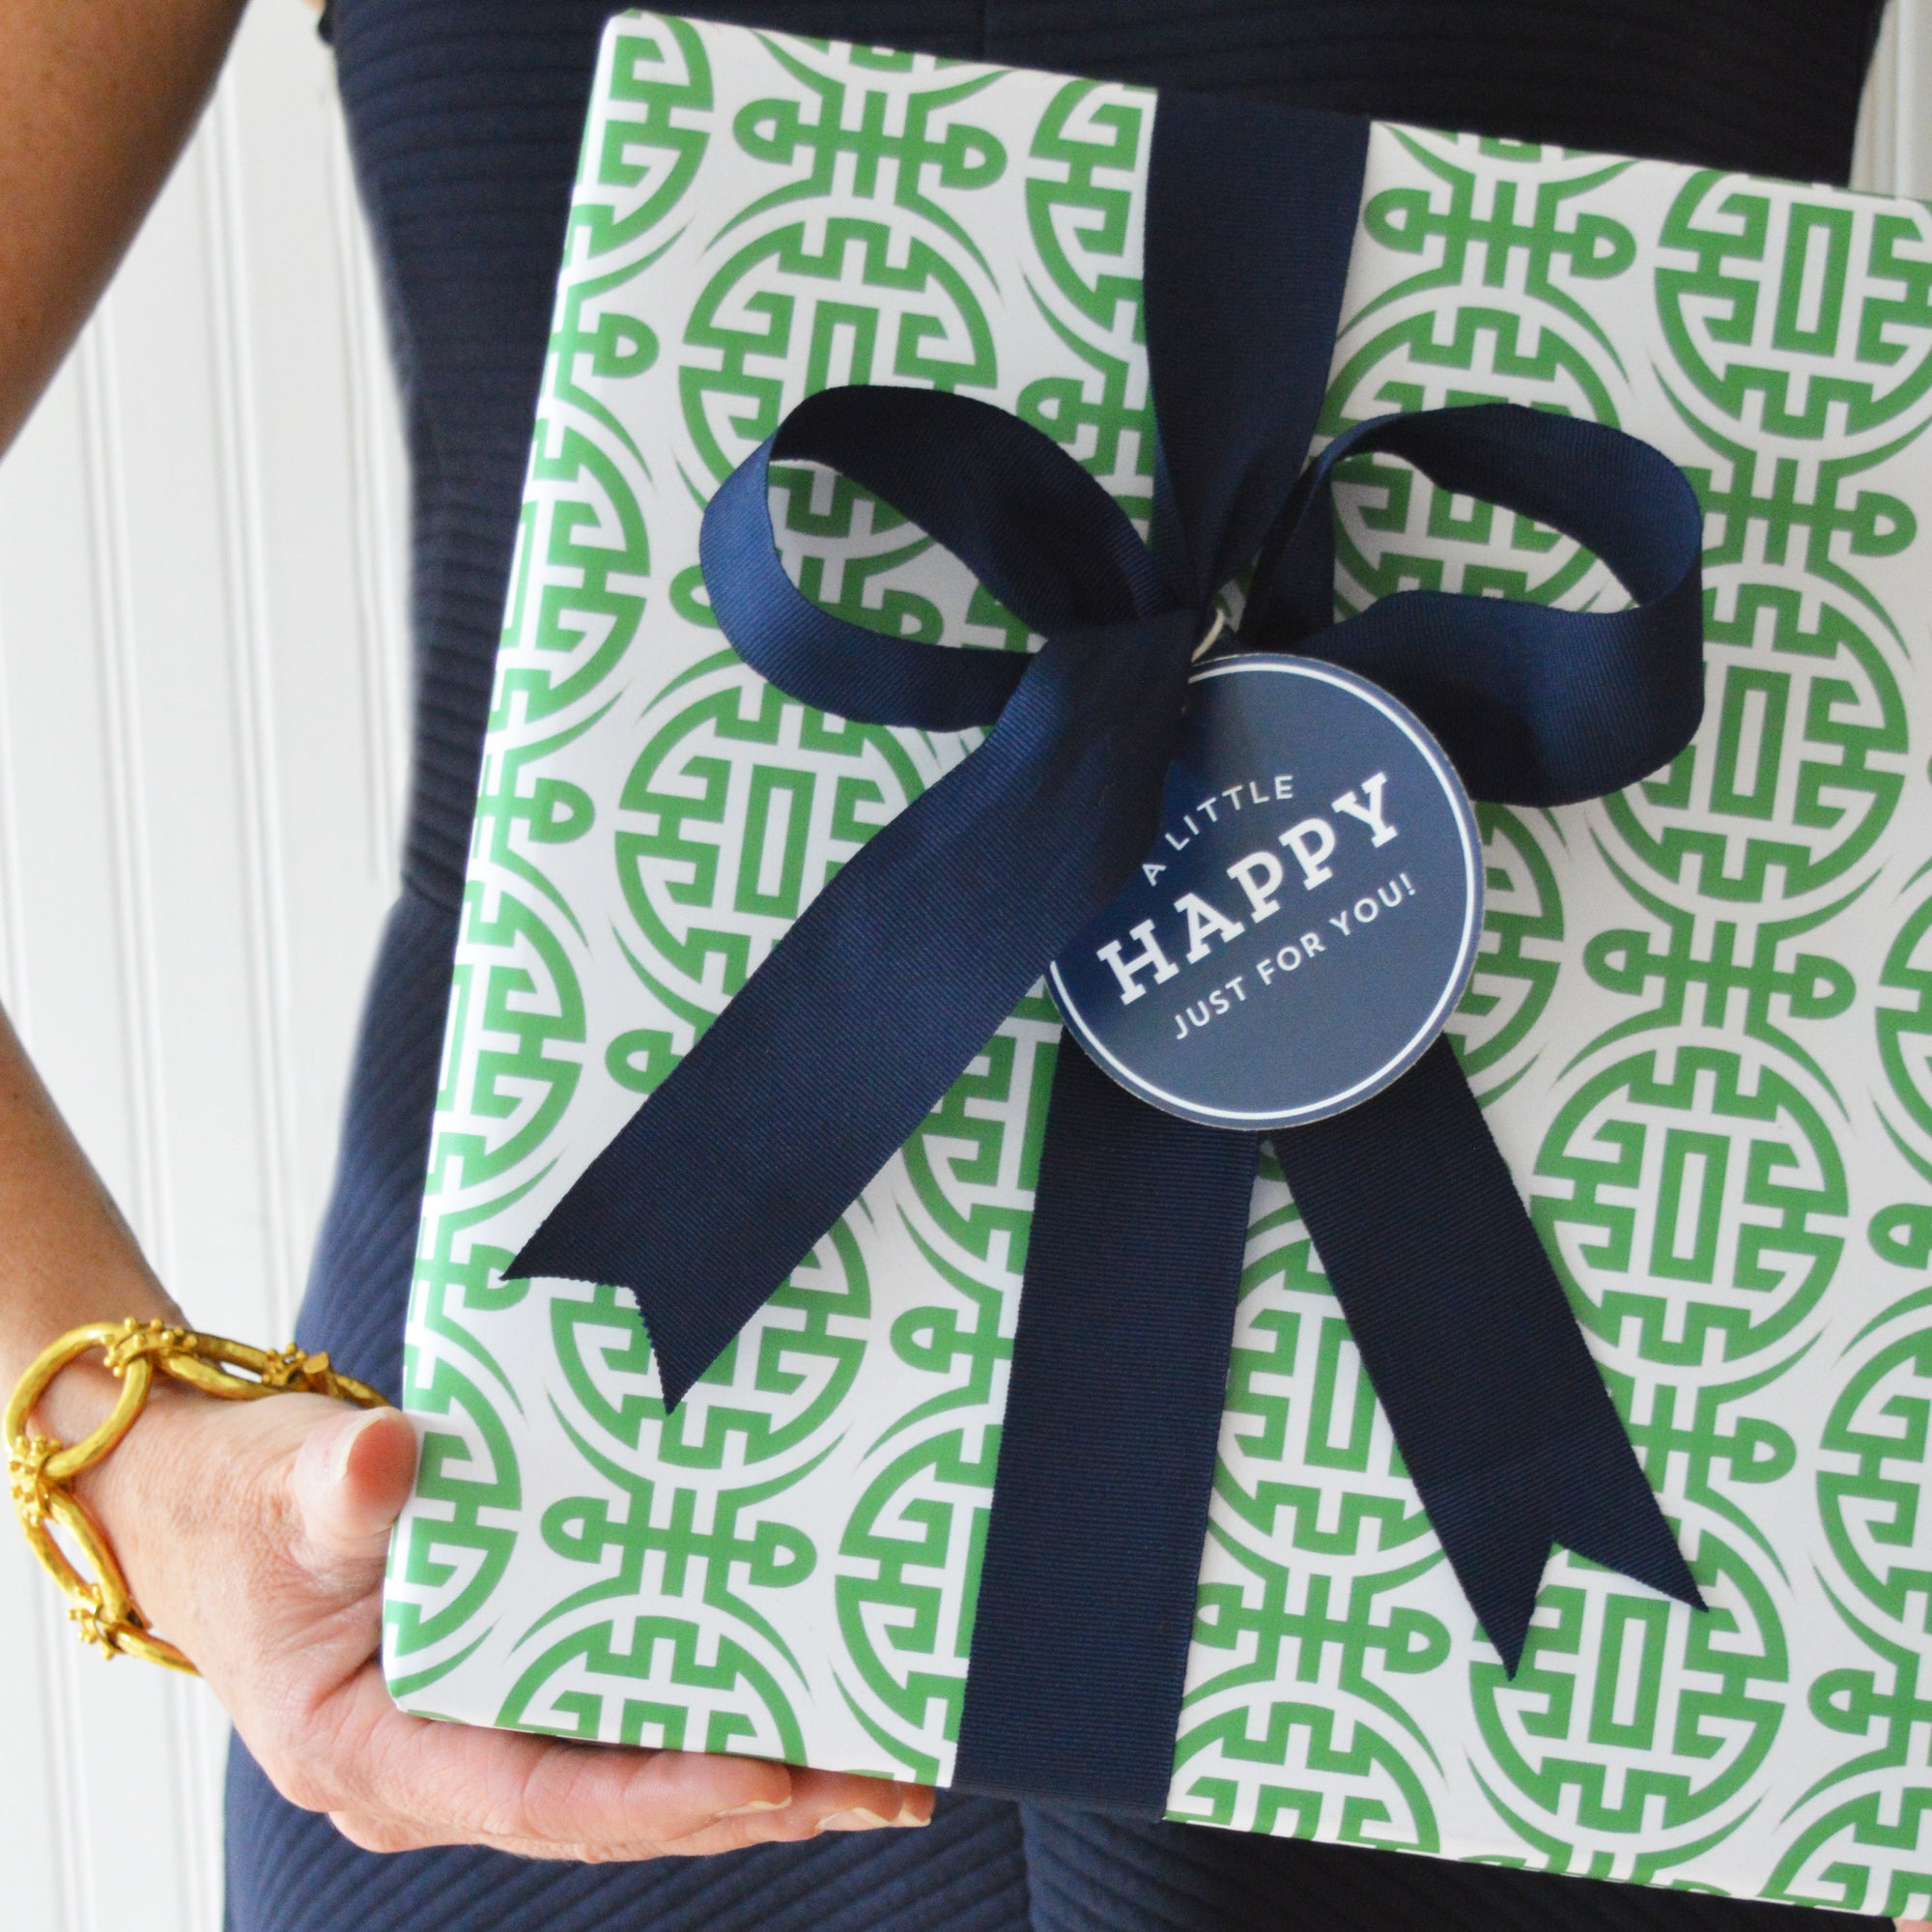 Stock Shoppe: 3" Round Navy Blue Gift Tags |  "A Little HAPPY Just for You!"